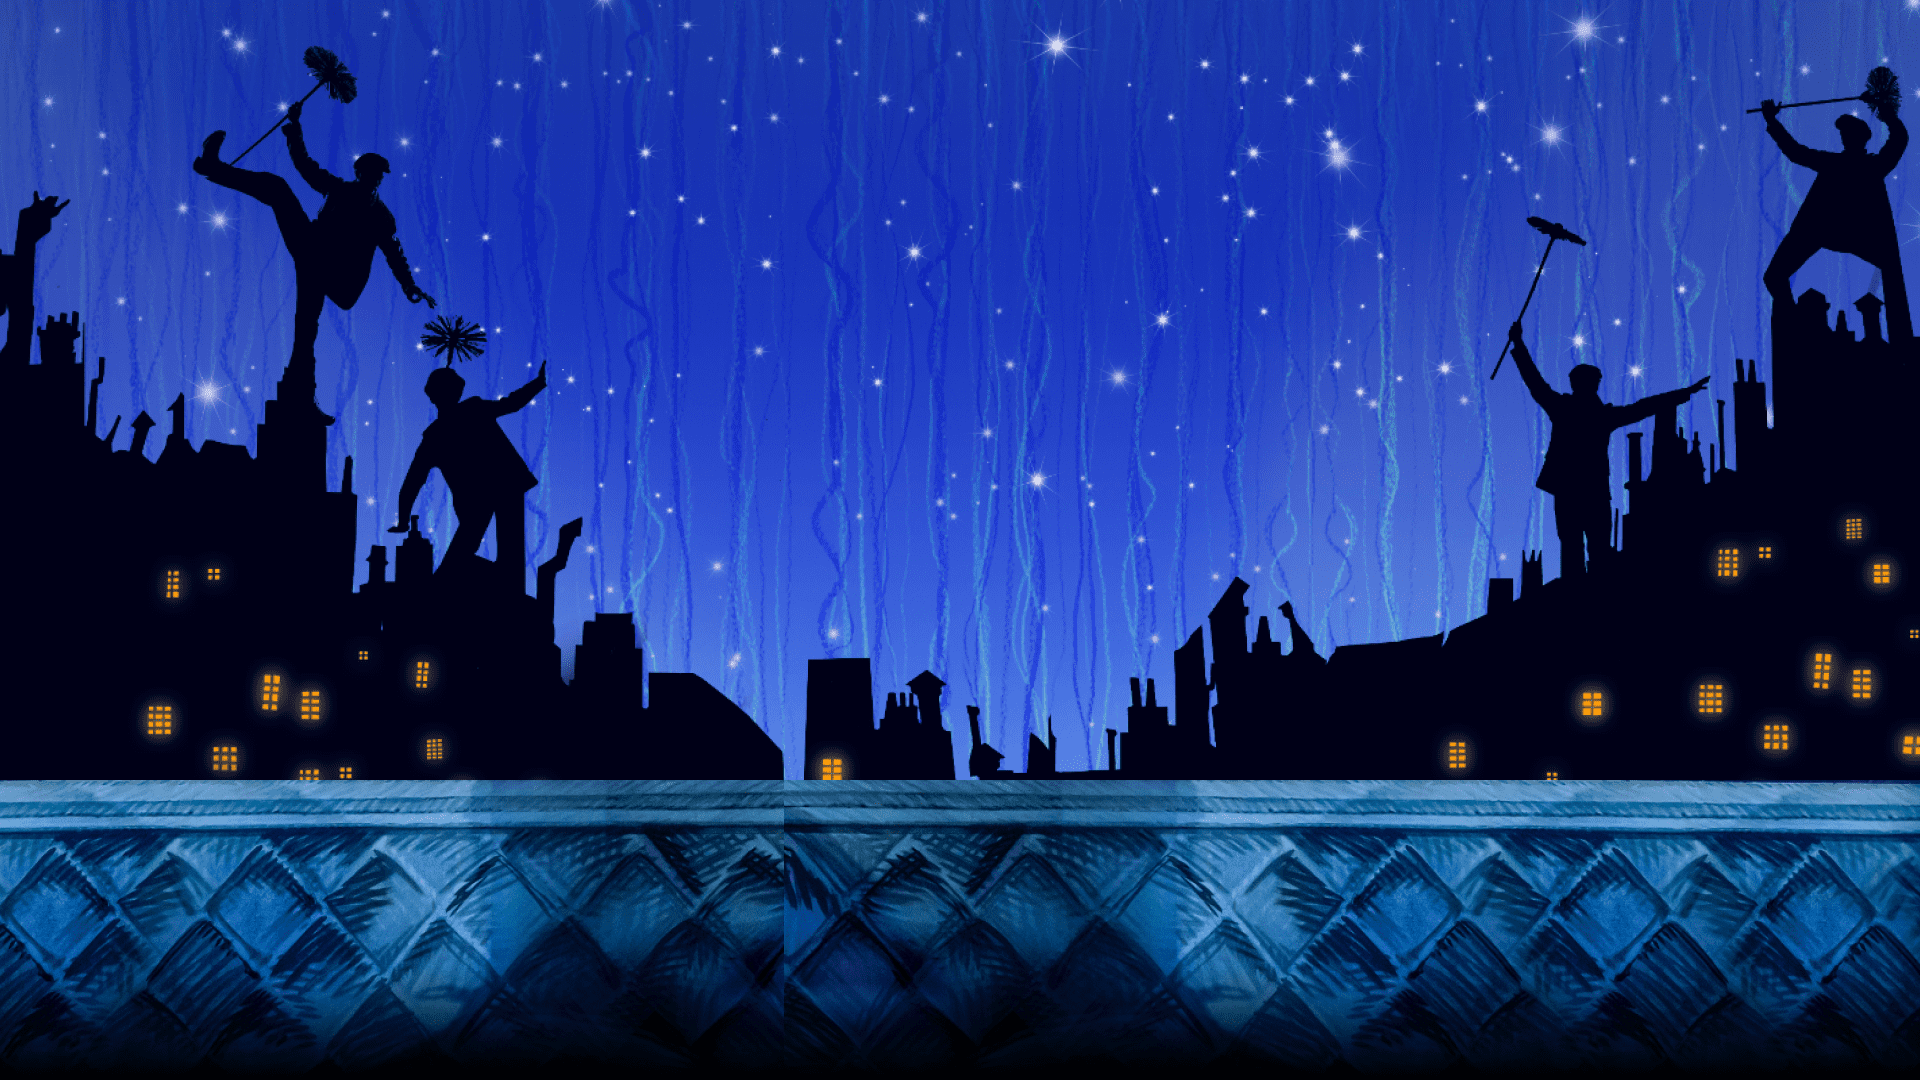 Background artwork depicting a night sky with chimney sweeps on roof tops